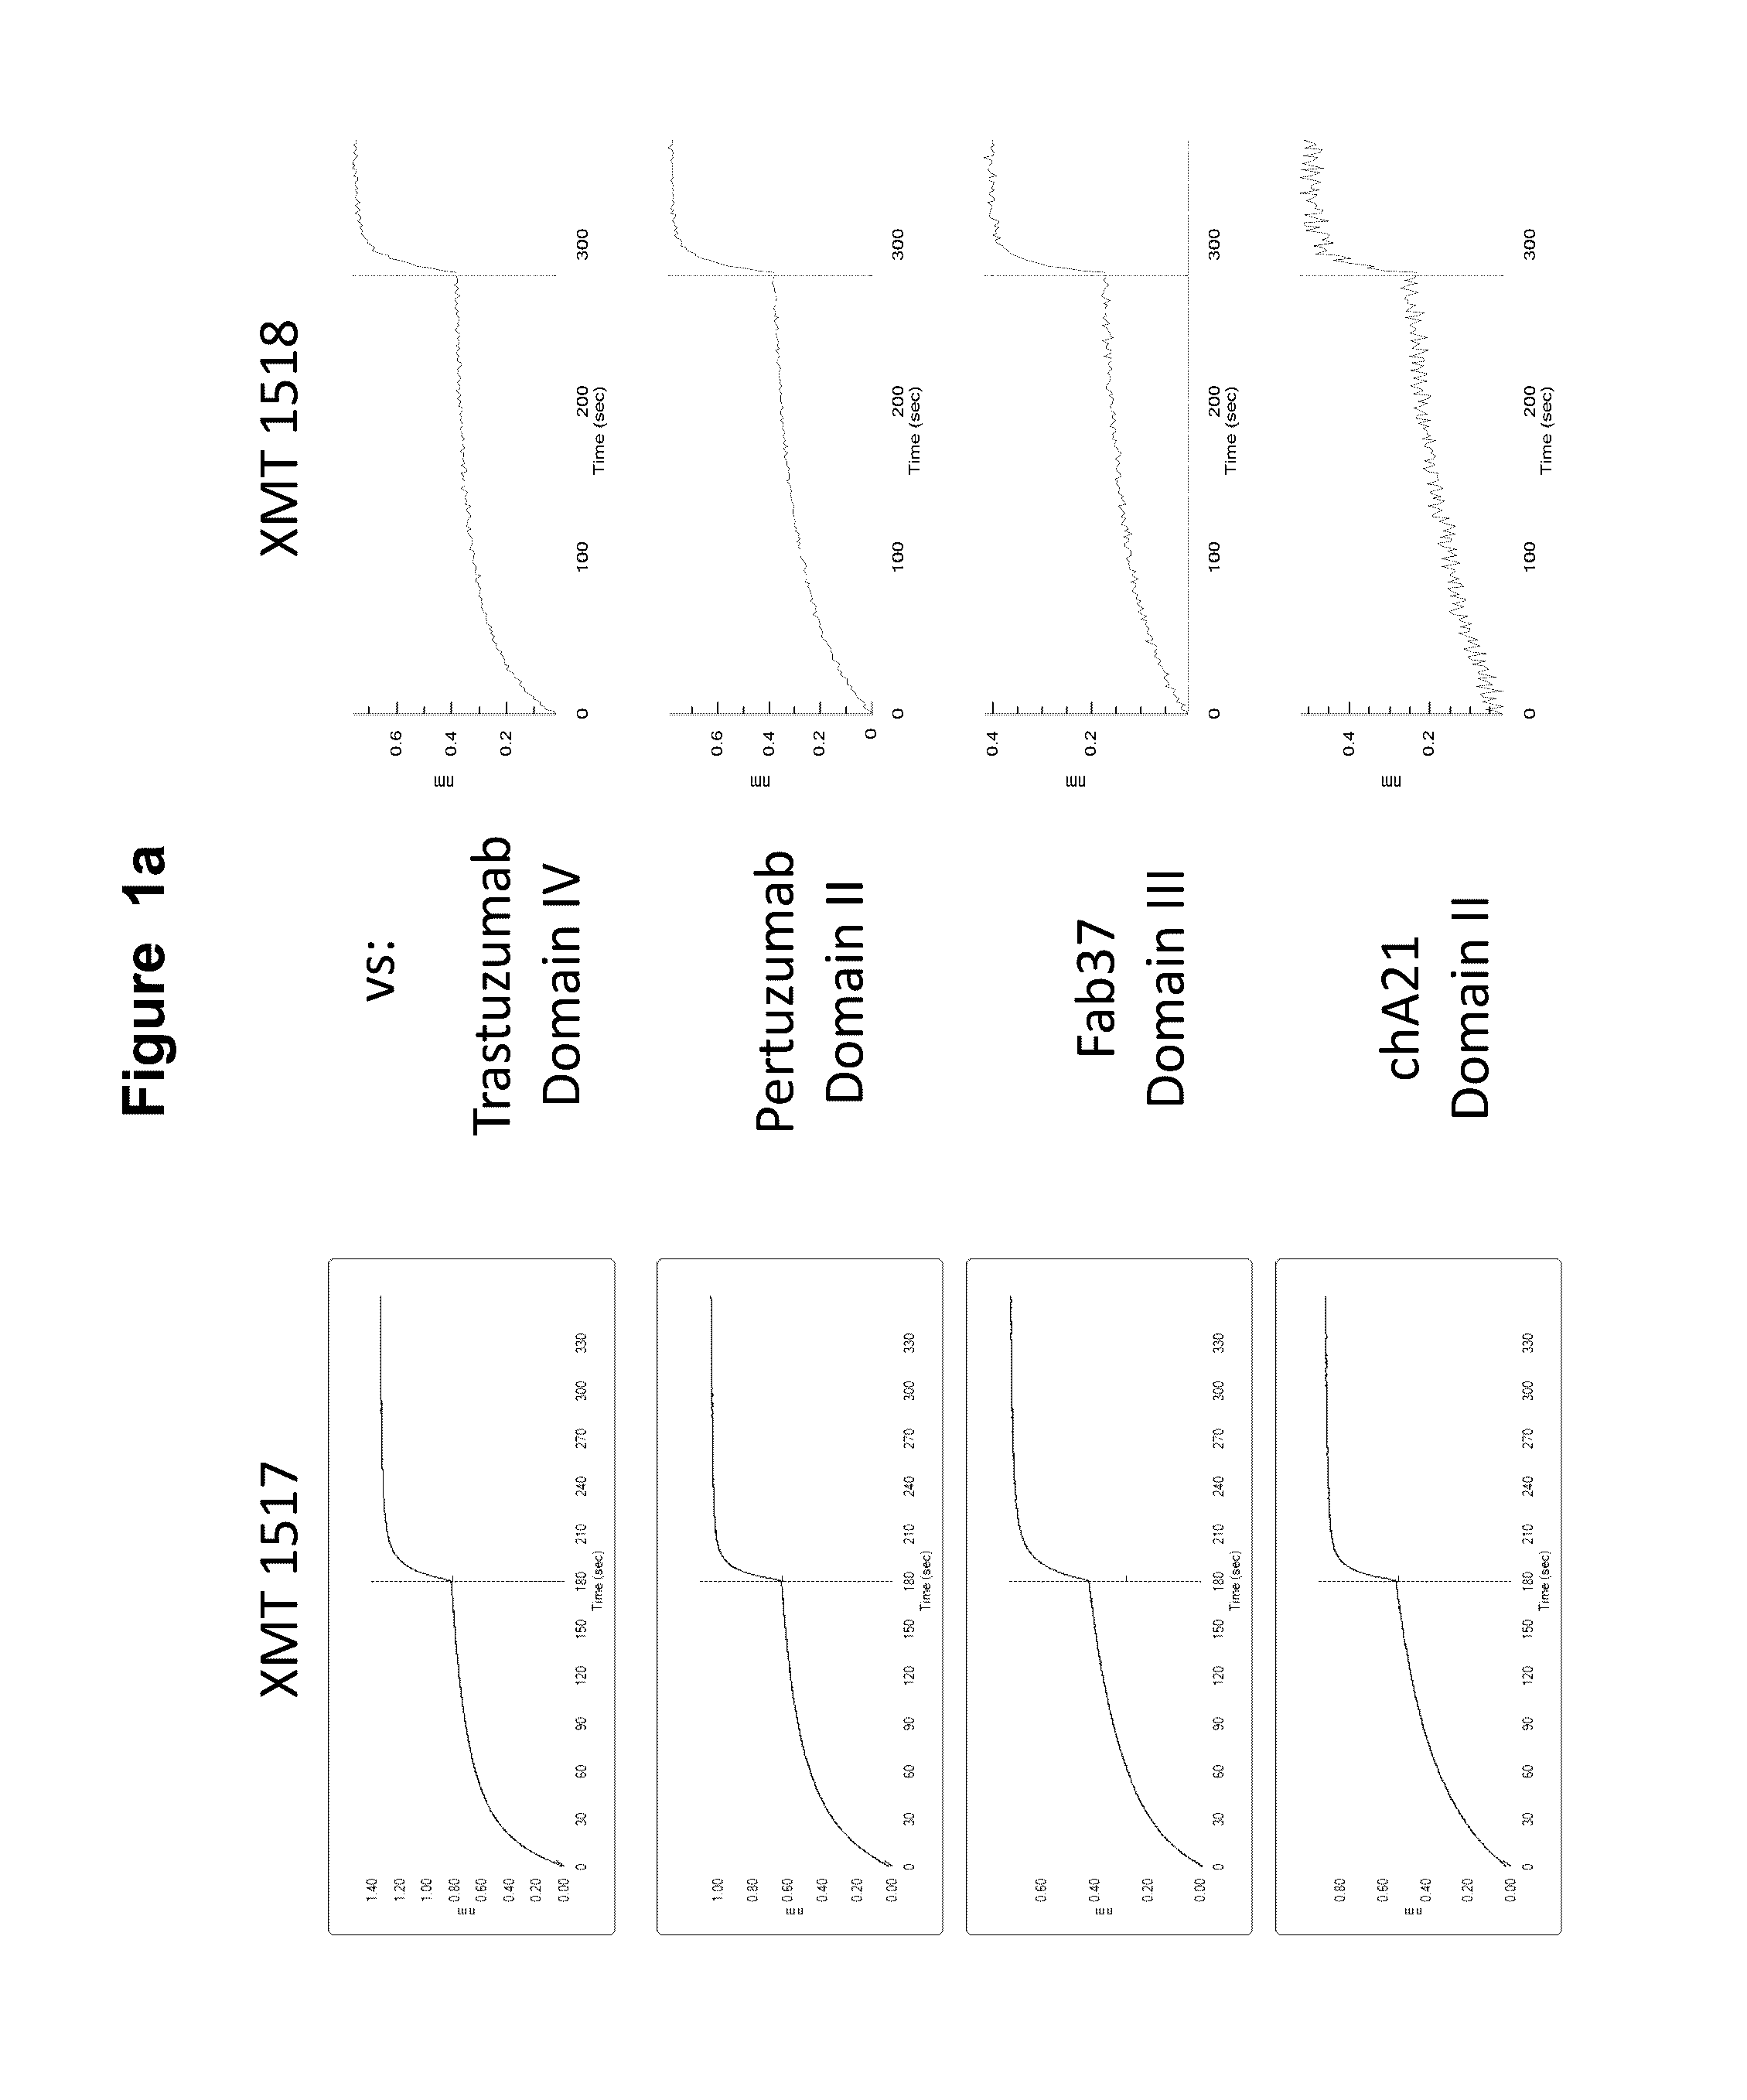 Monoclonal antibodies against HER2 epitope and methods of use thereof